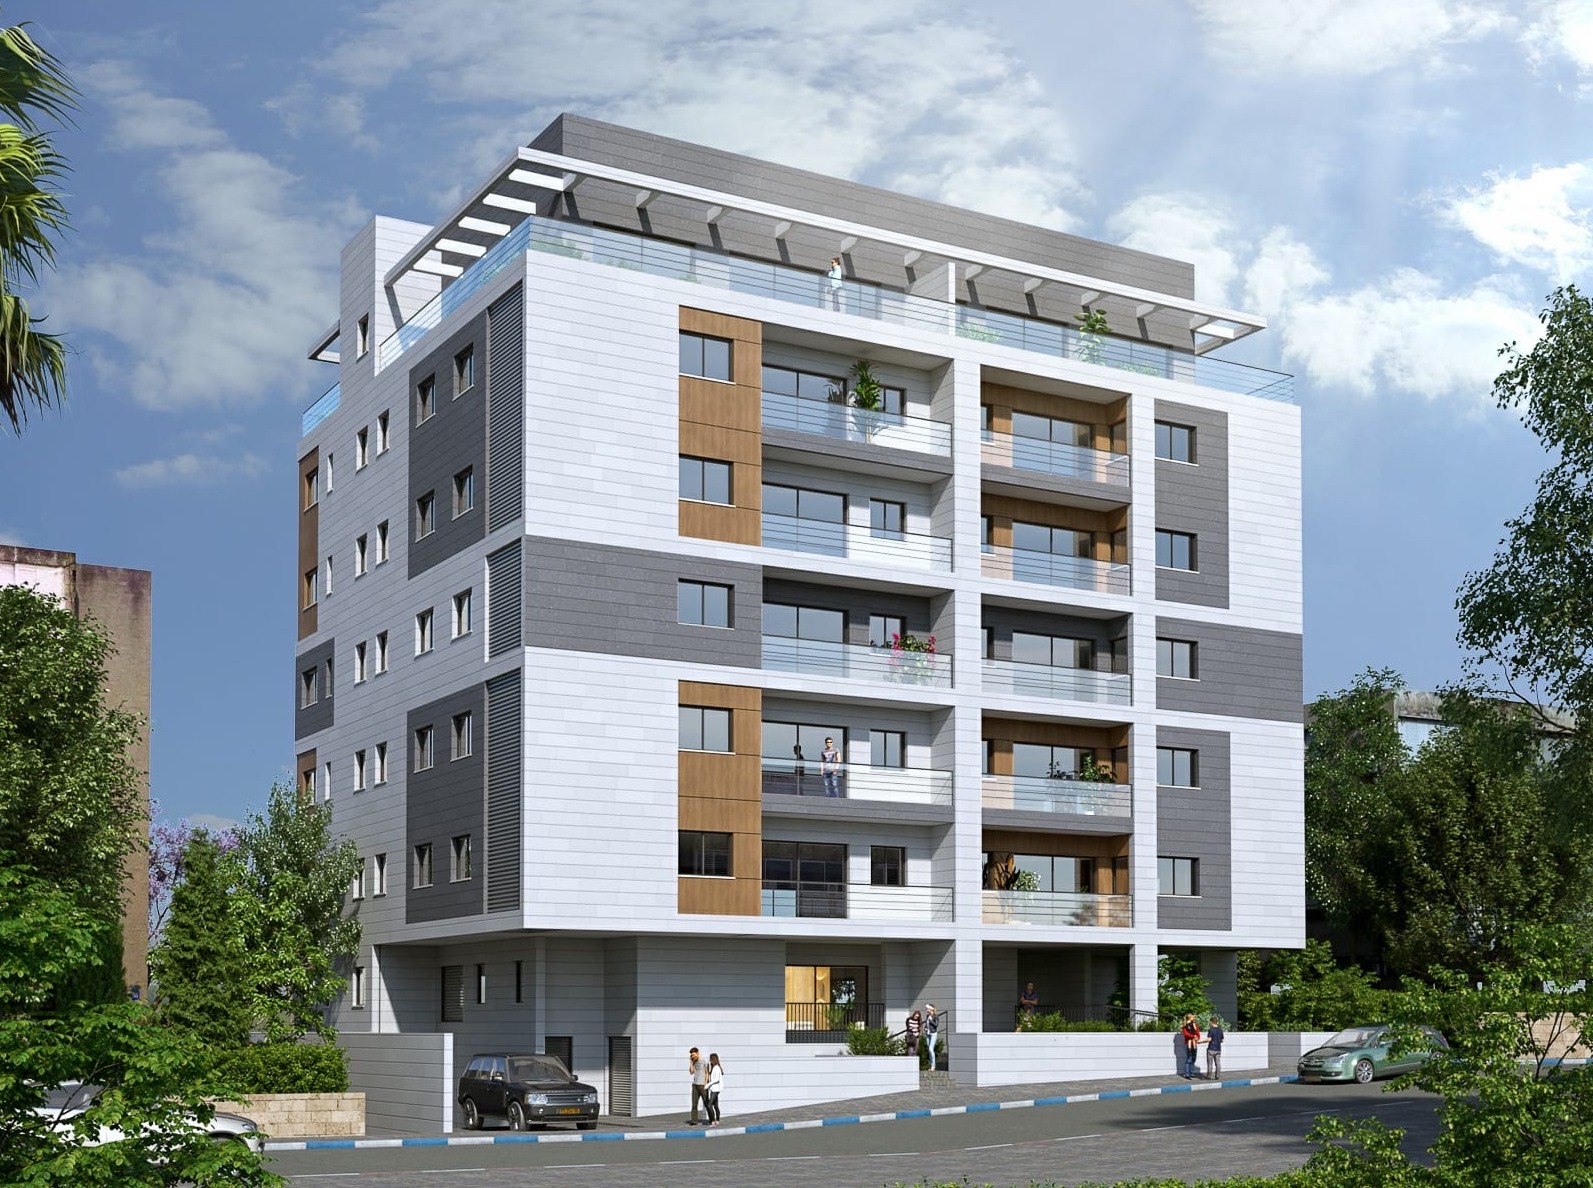 New building project in the center of Raanana